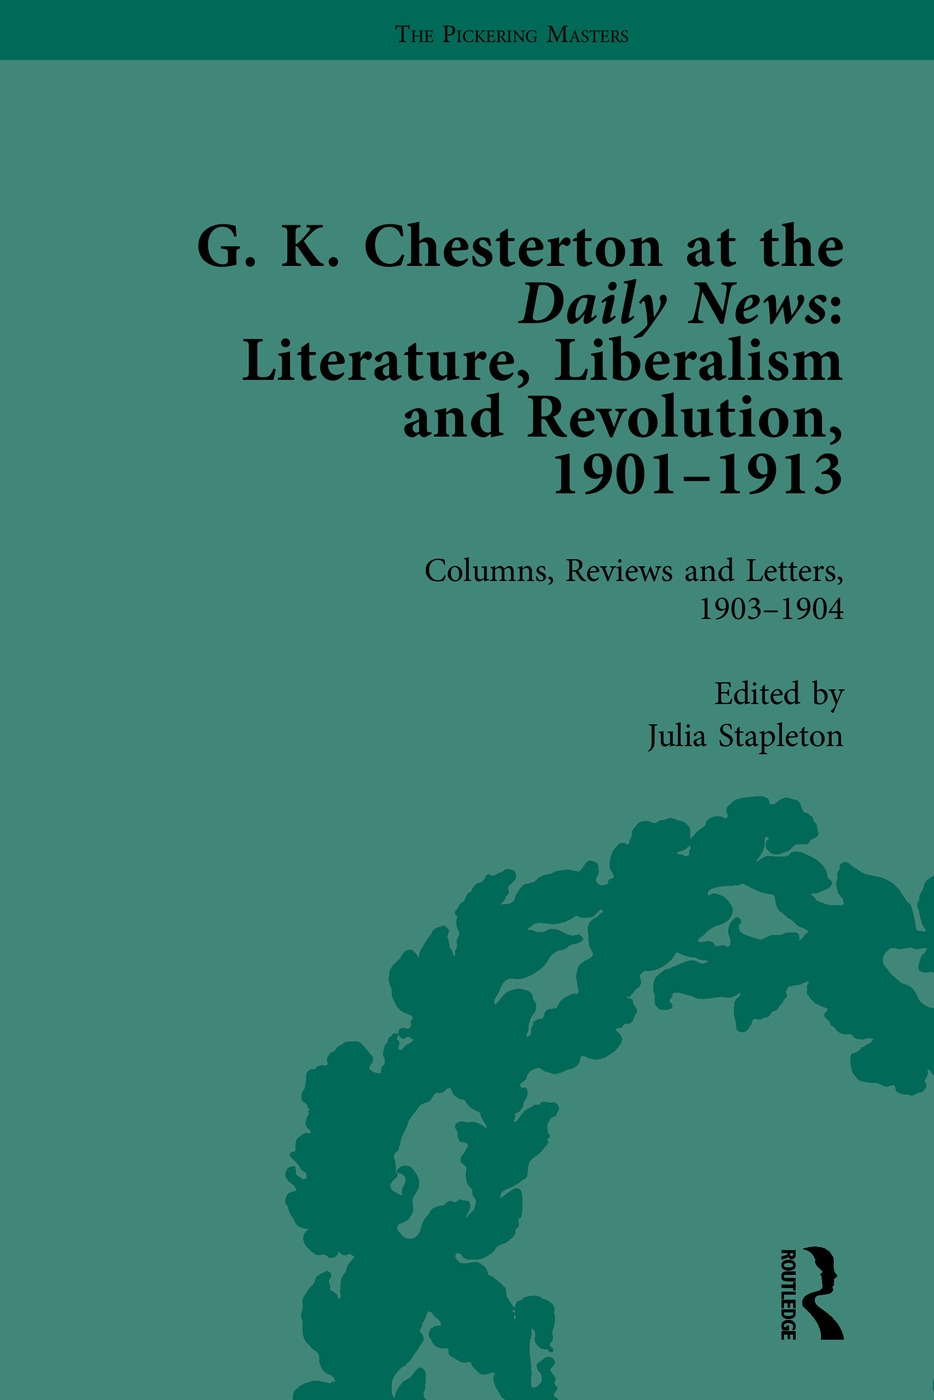 G K Chesterton at the Daily News, Part I: Literature, Liberalism and Revolution, 1901-1913